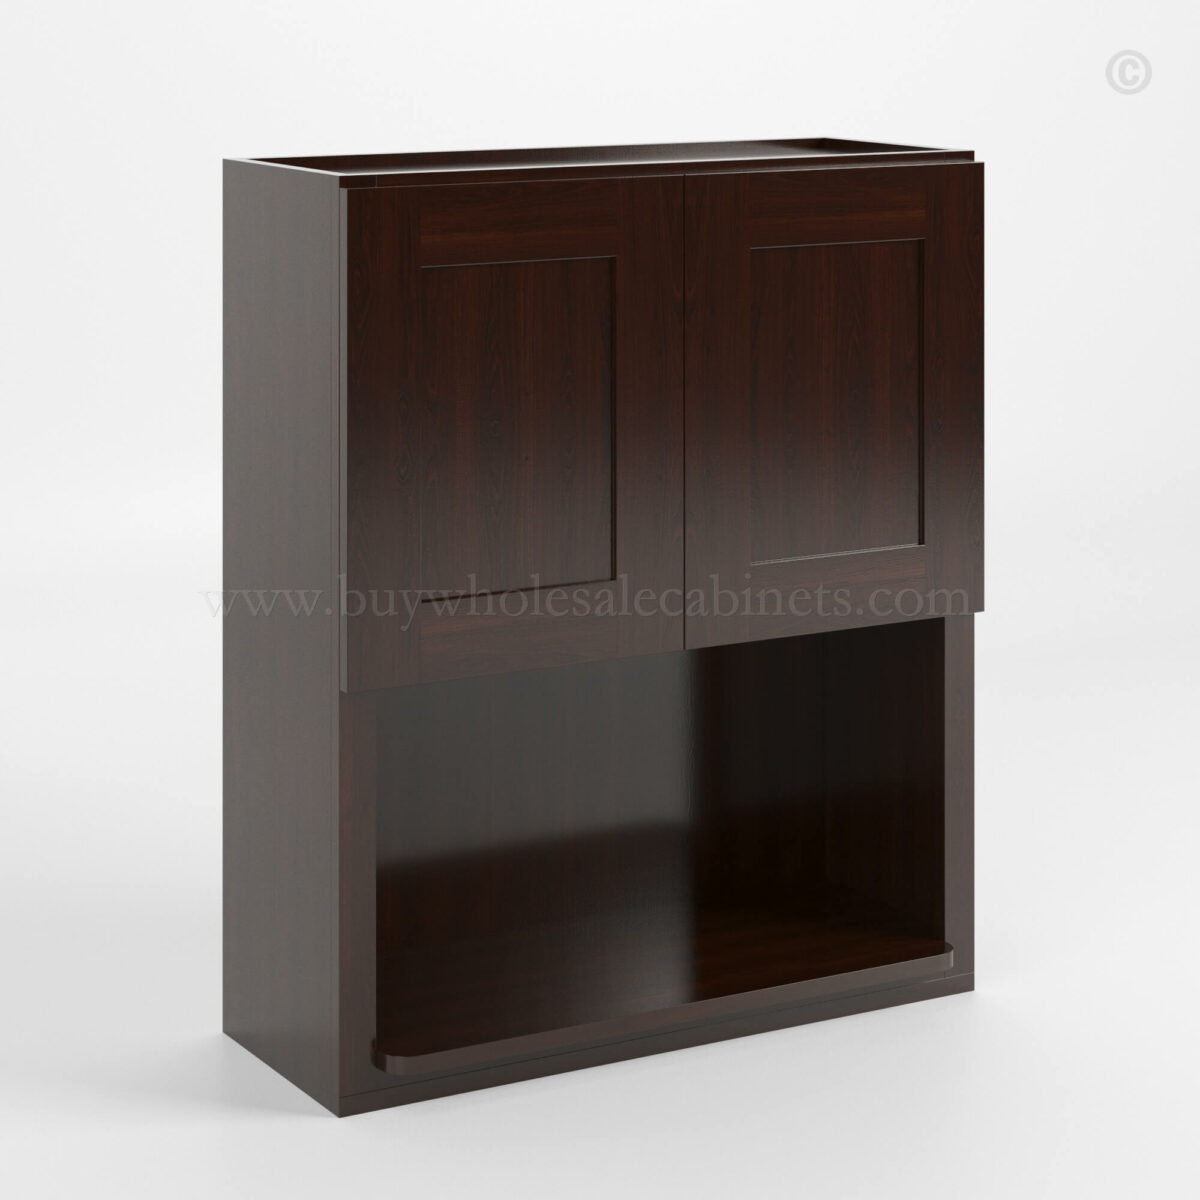 Shaker Espresso Microwave Wall Cabinet image 1